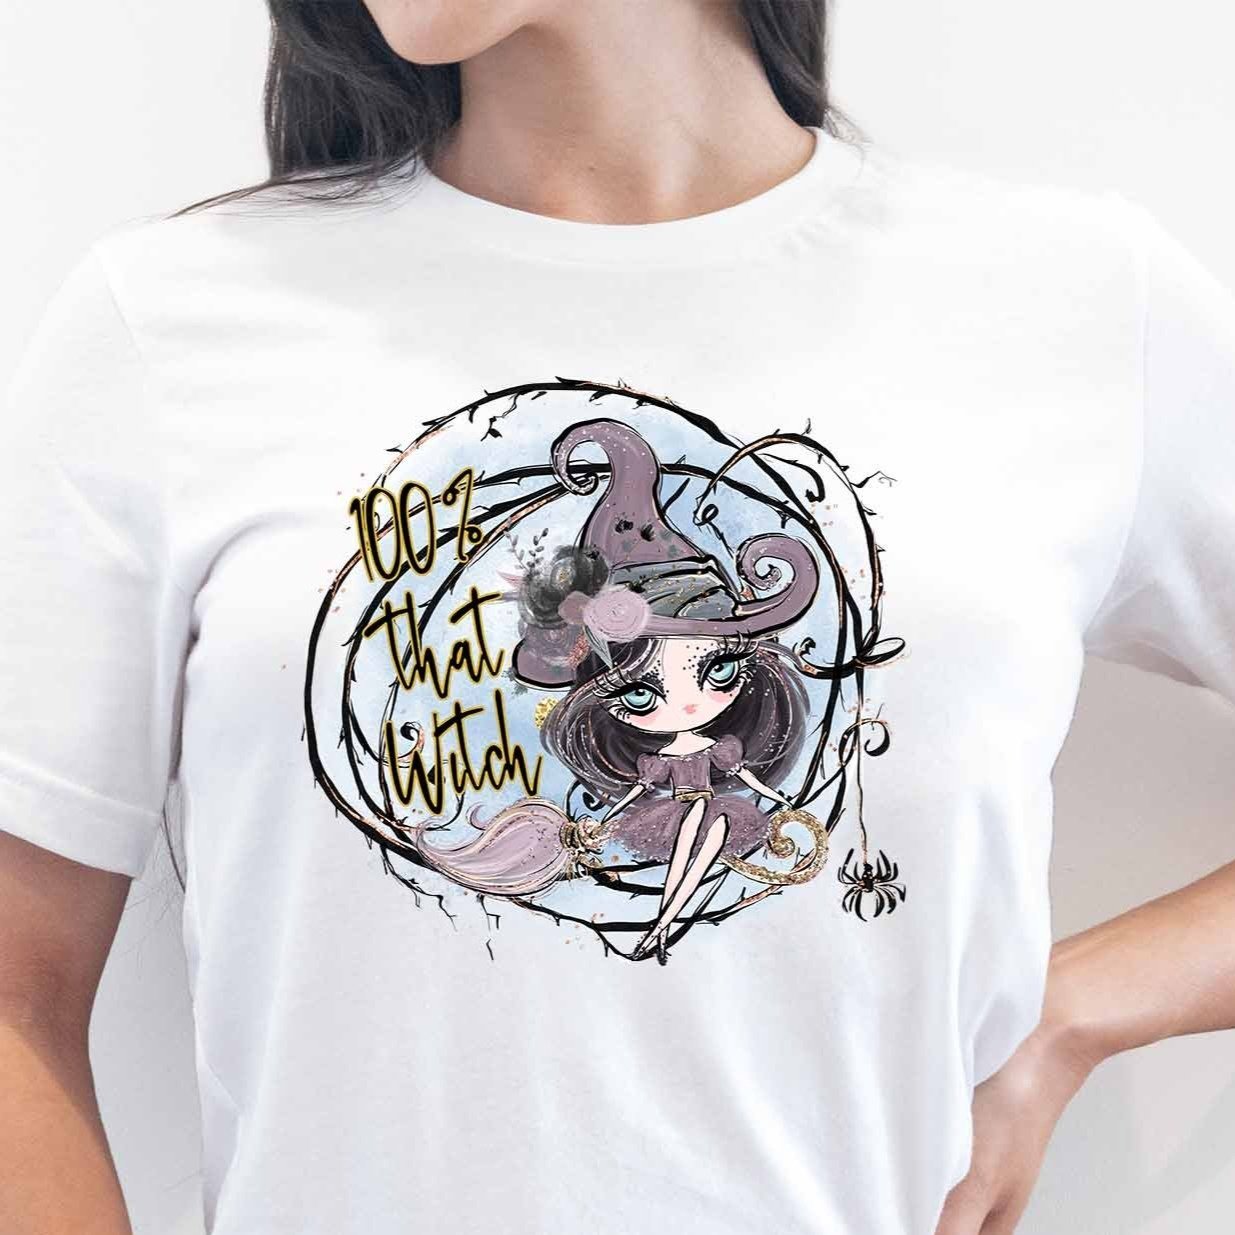 100% That Witch 3 Graphic Tee - My Custom Tee Party